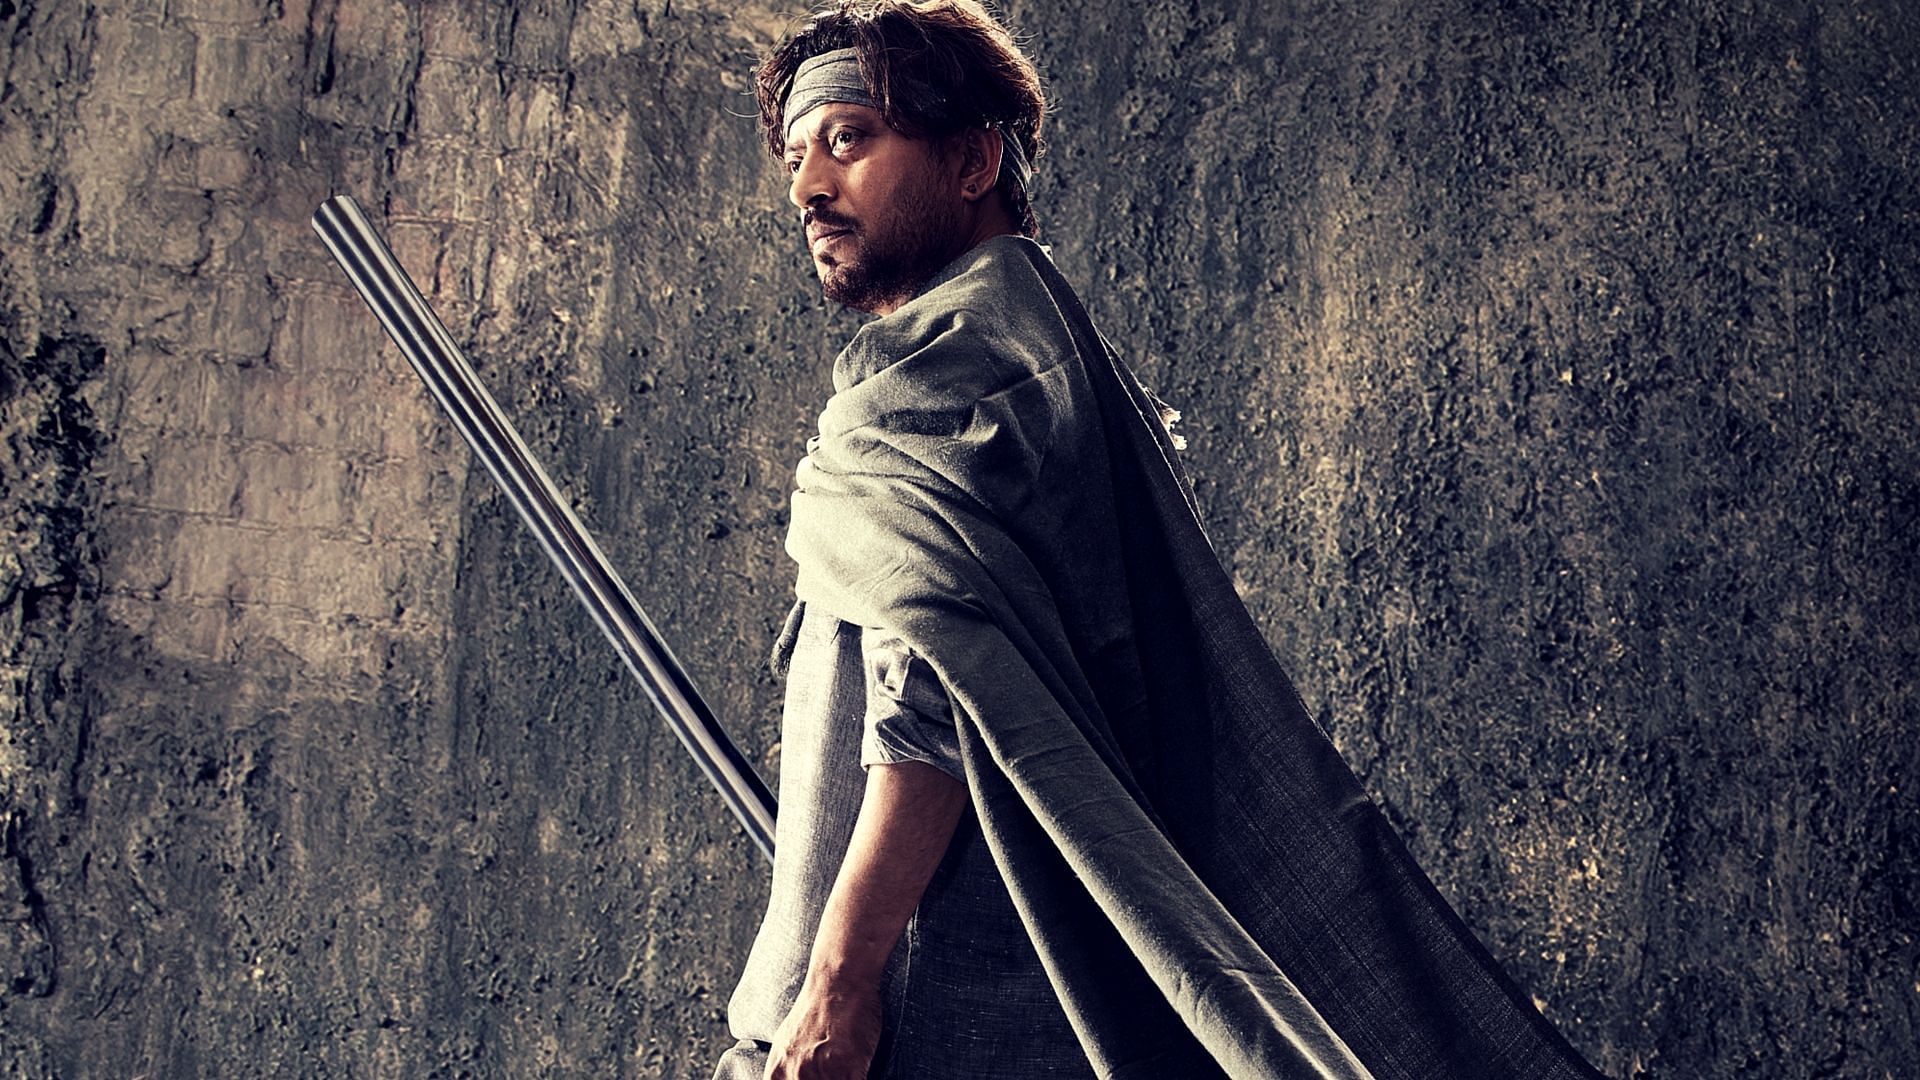 Irrfan Khan in a still from ‘Madaari’. Image used for representational purposes.